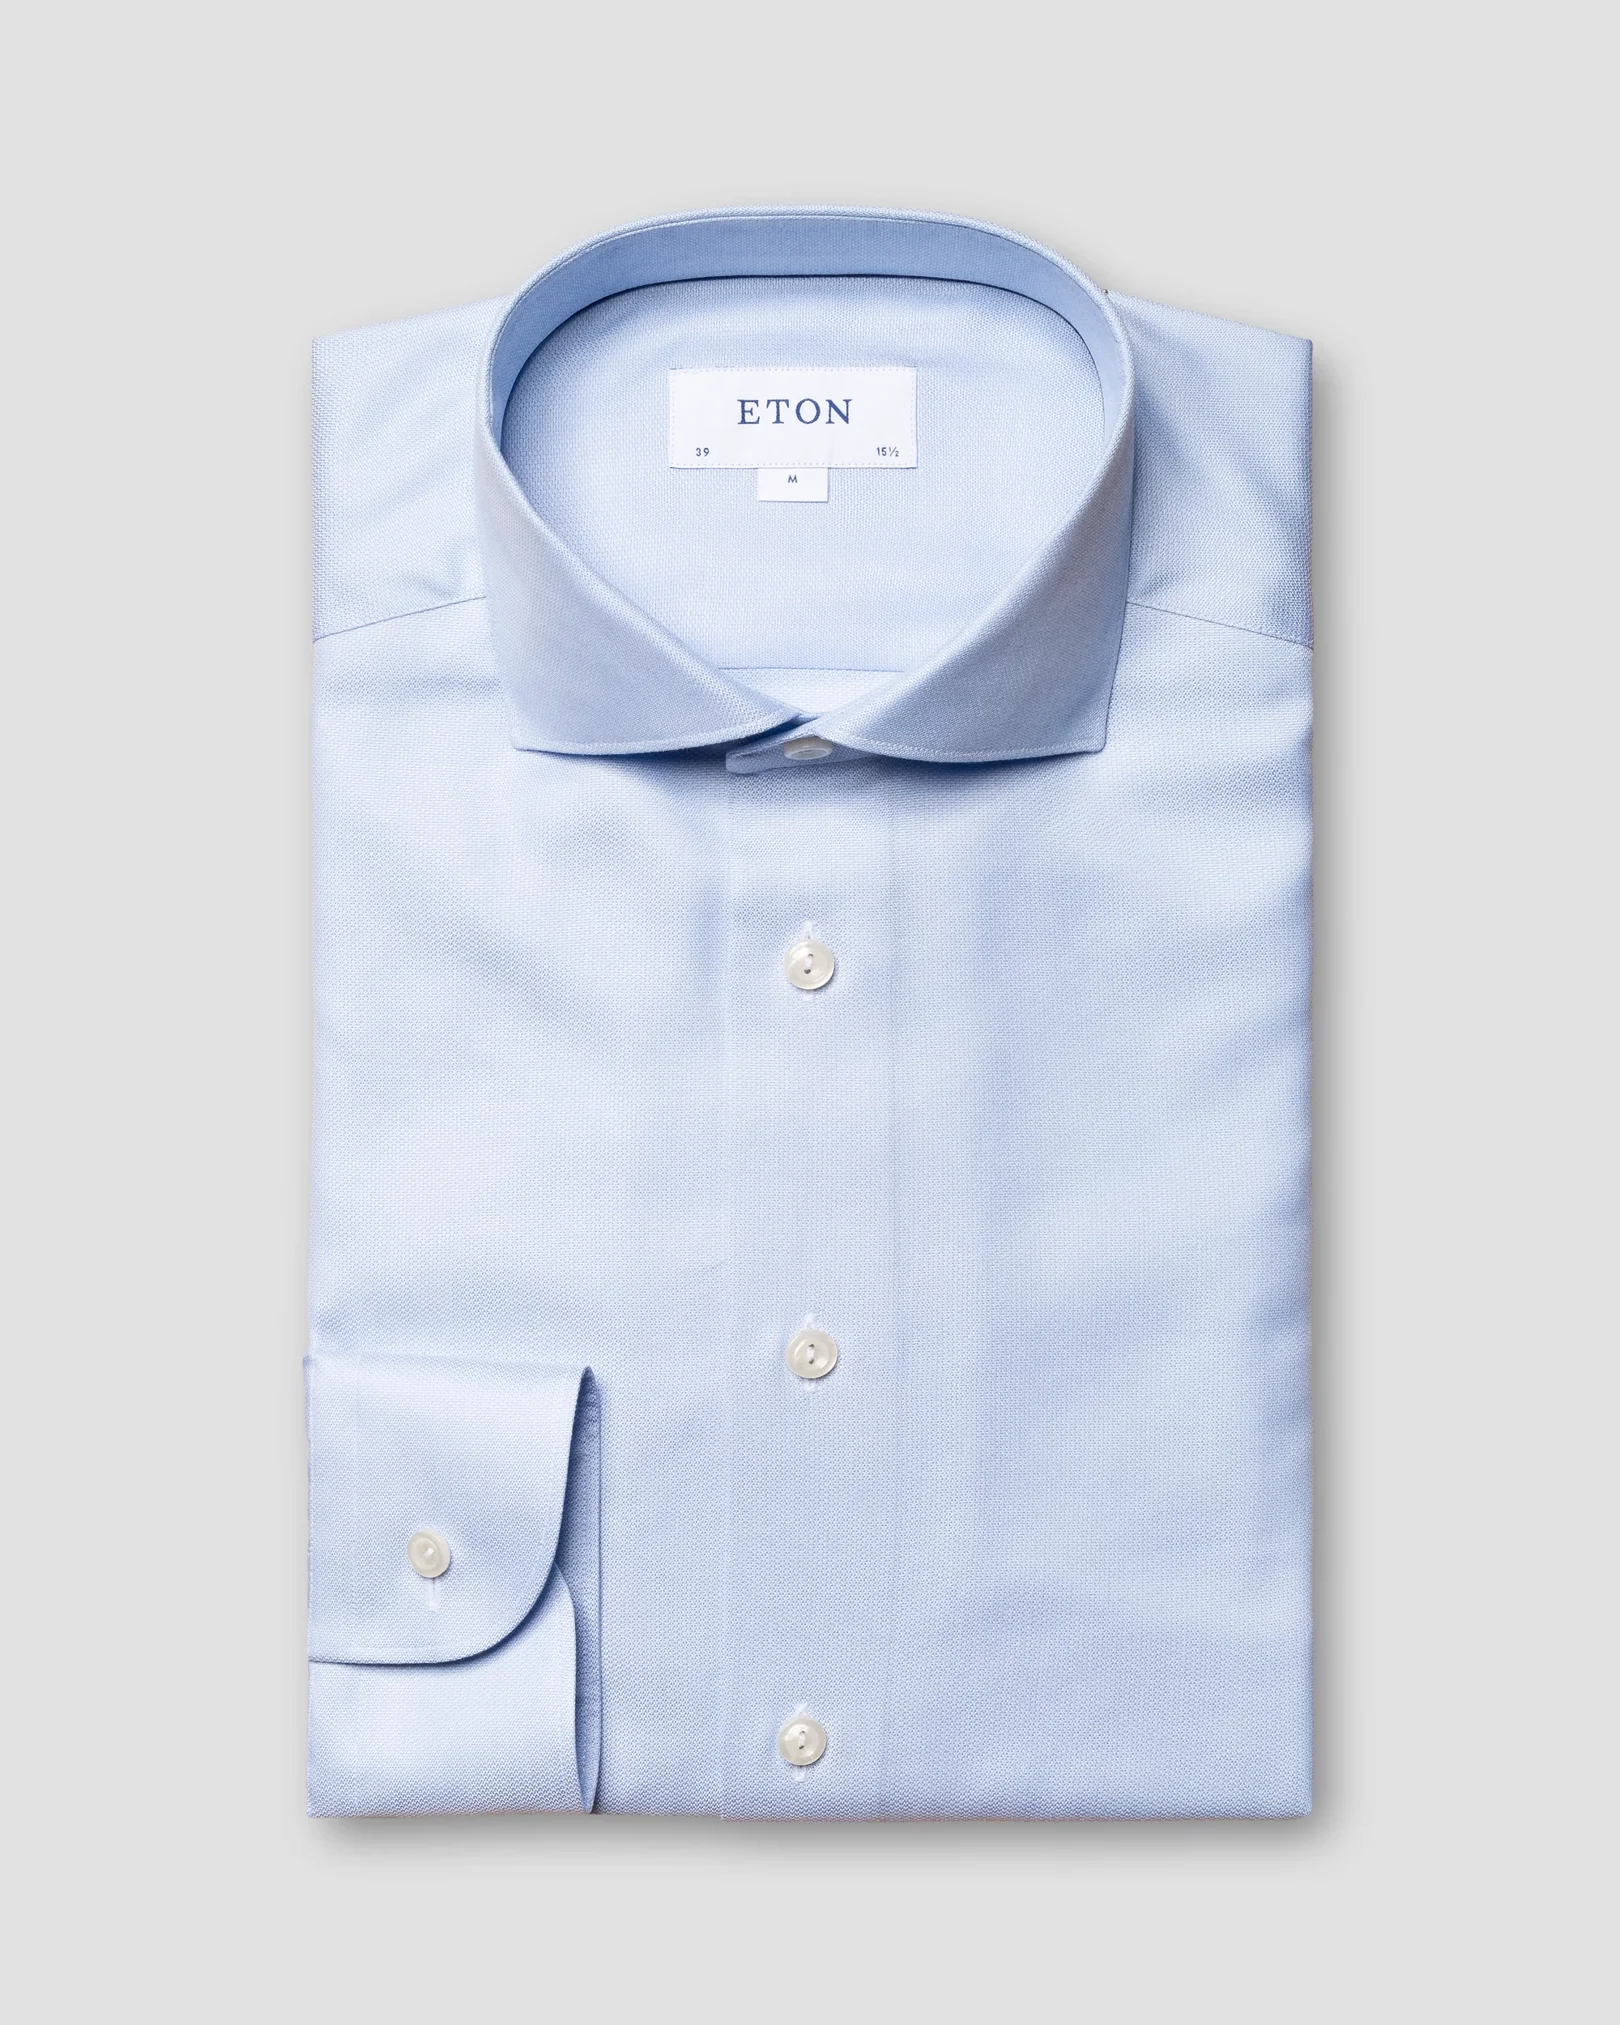 Eton - light blue cotton lyocell stretch wide spread rounded single one buttonhole slim